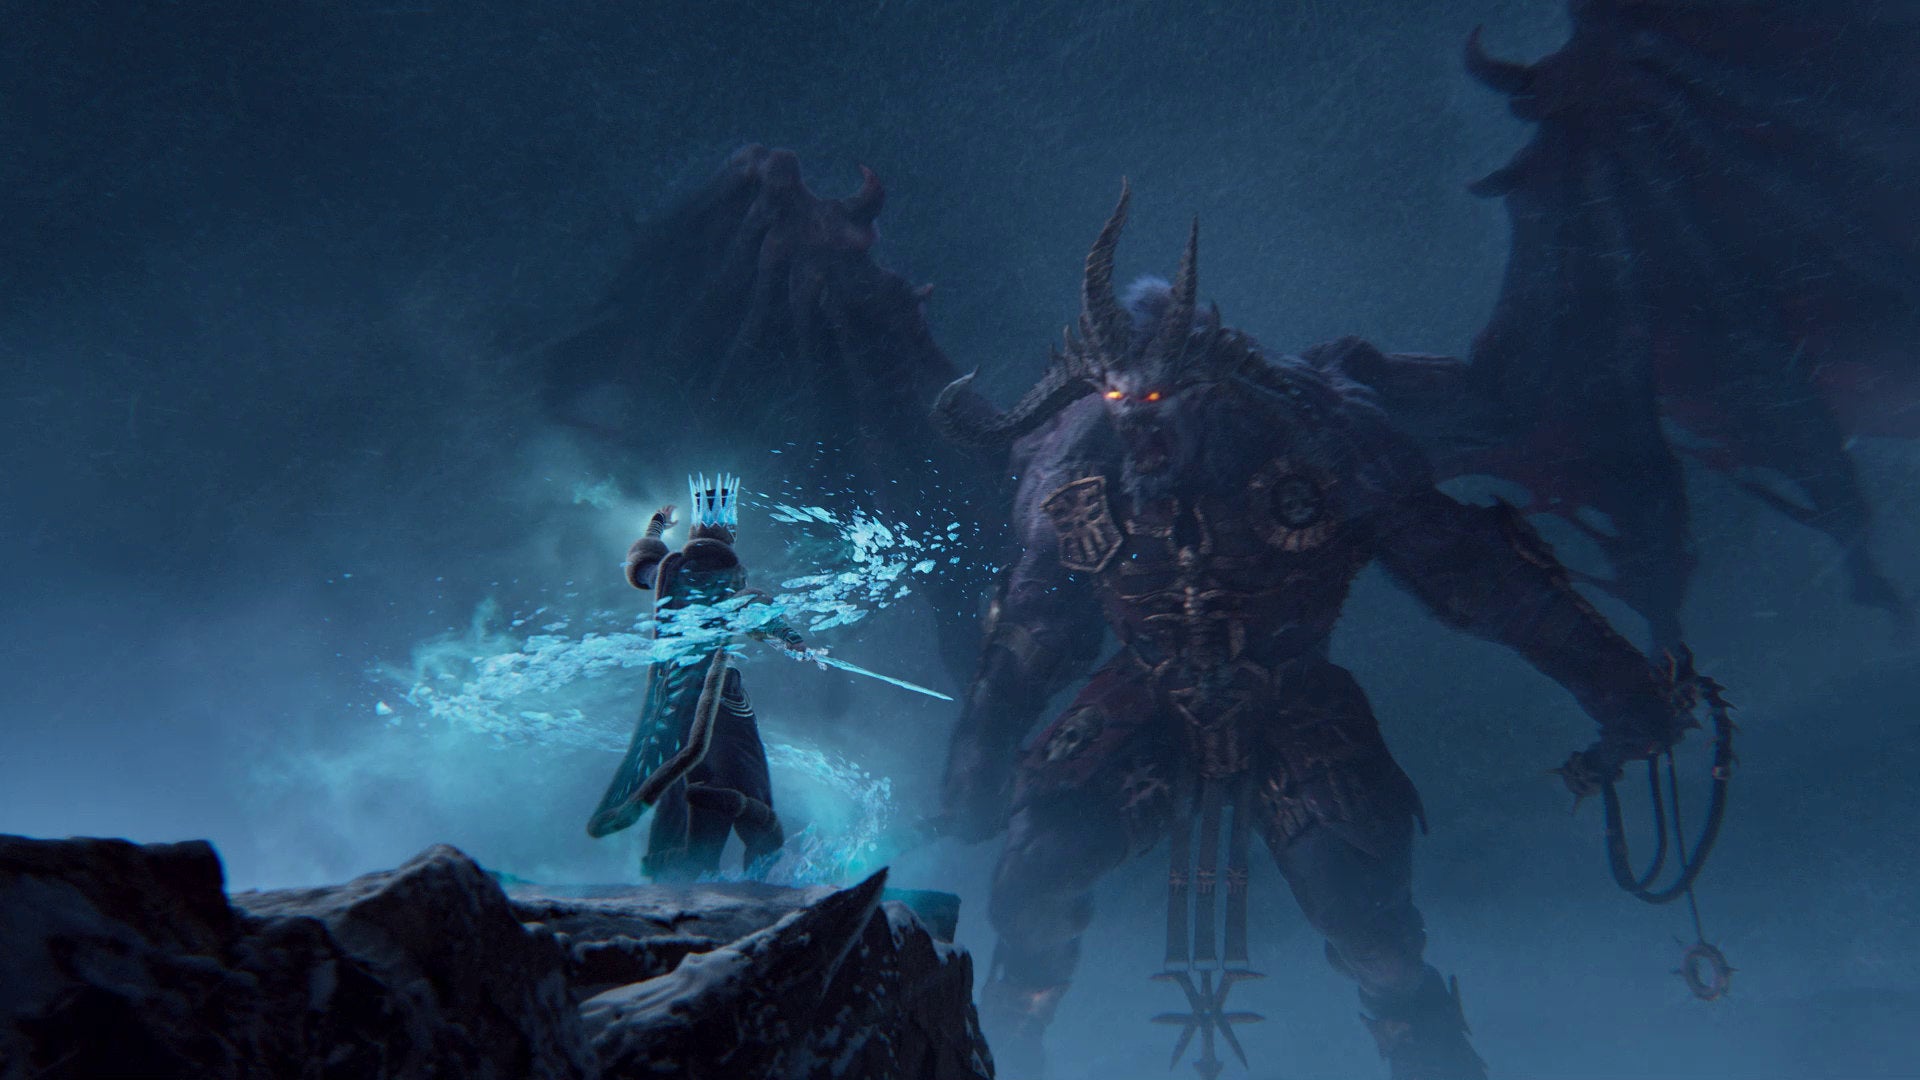 A Kislev ice witch faces a Chaos monster in the Total War: Warhammer 3 cinematic trailer.